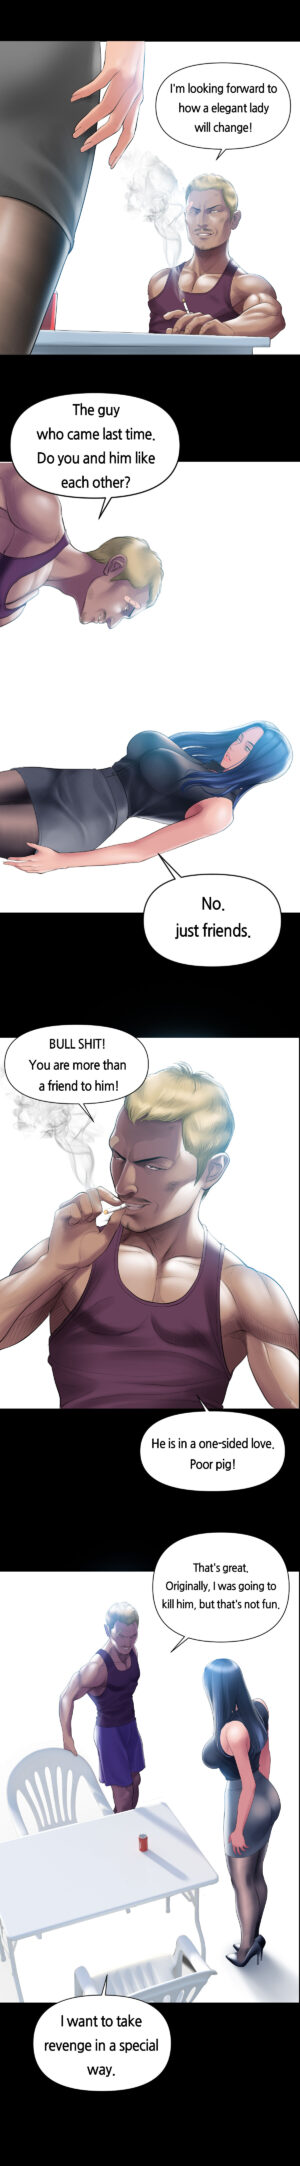 [Dr. Stein] Smoking Hypnosis (ongoing)